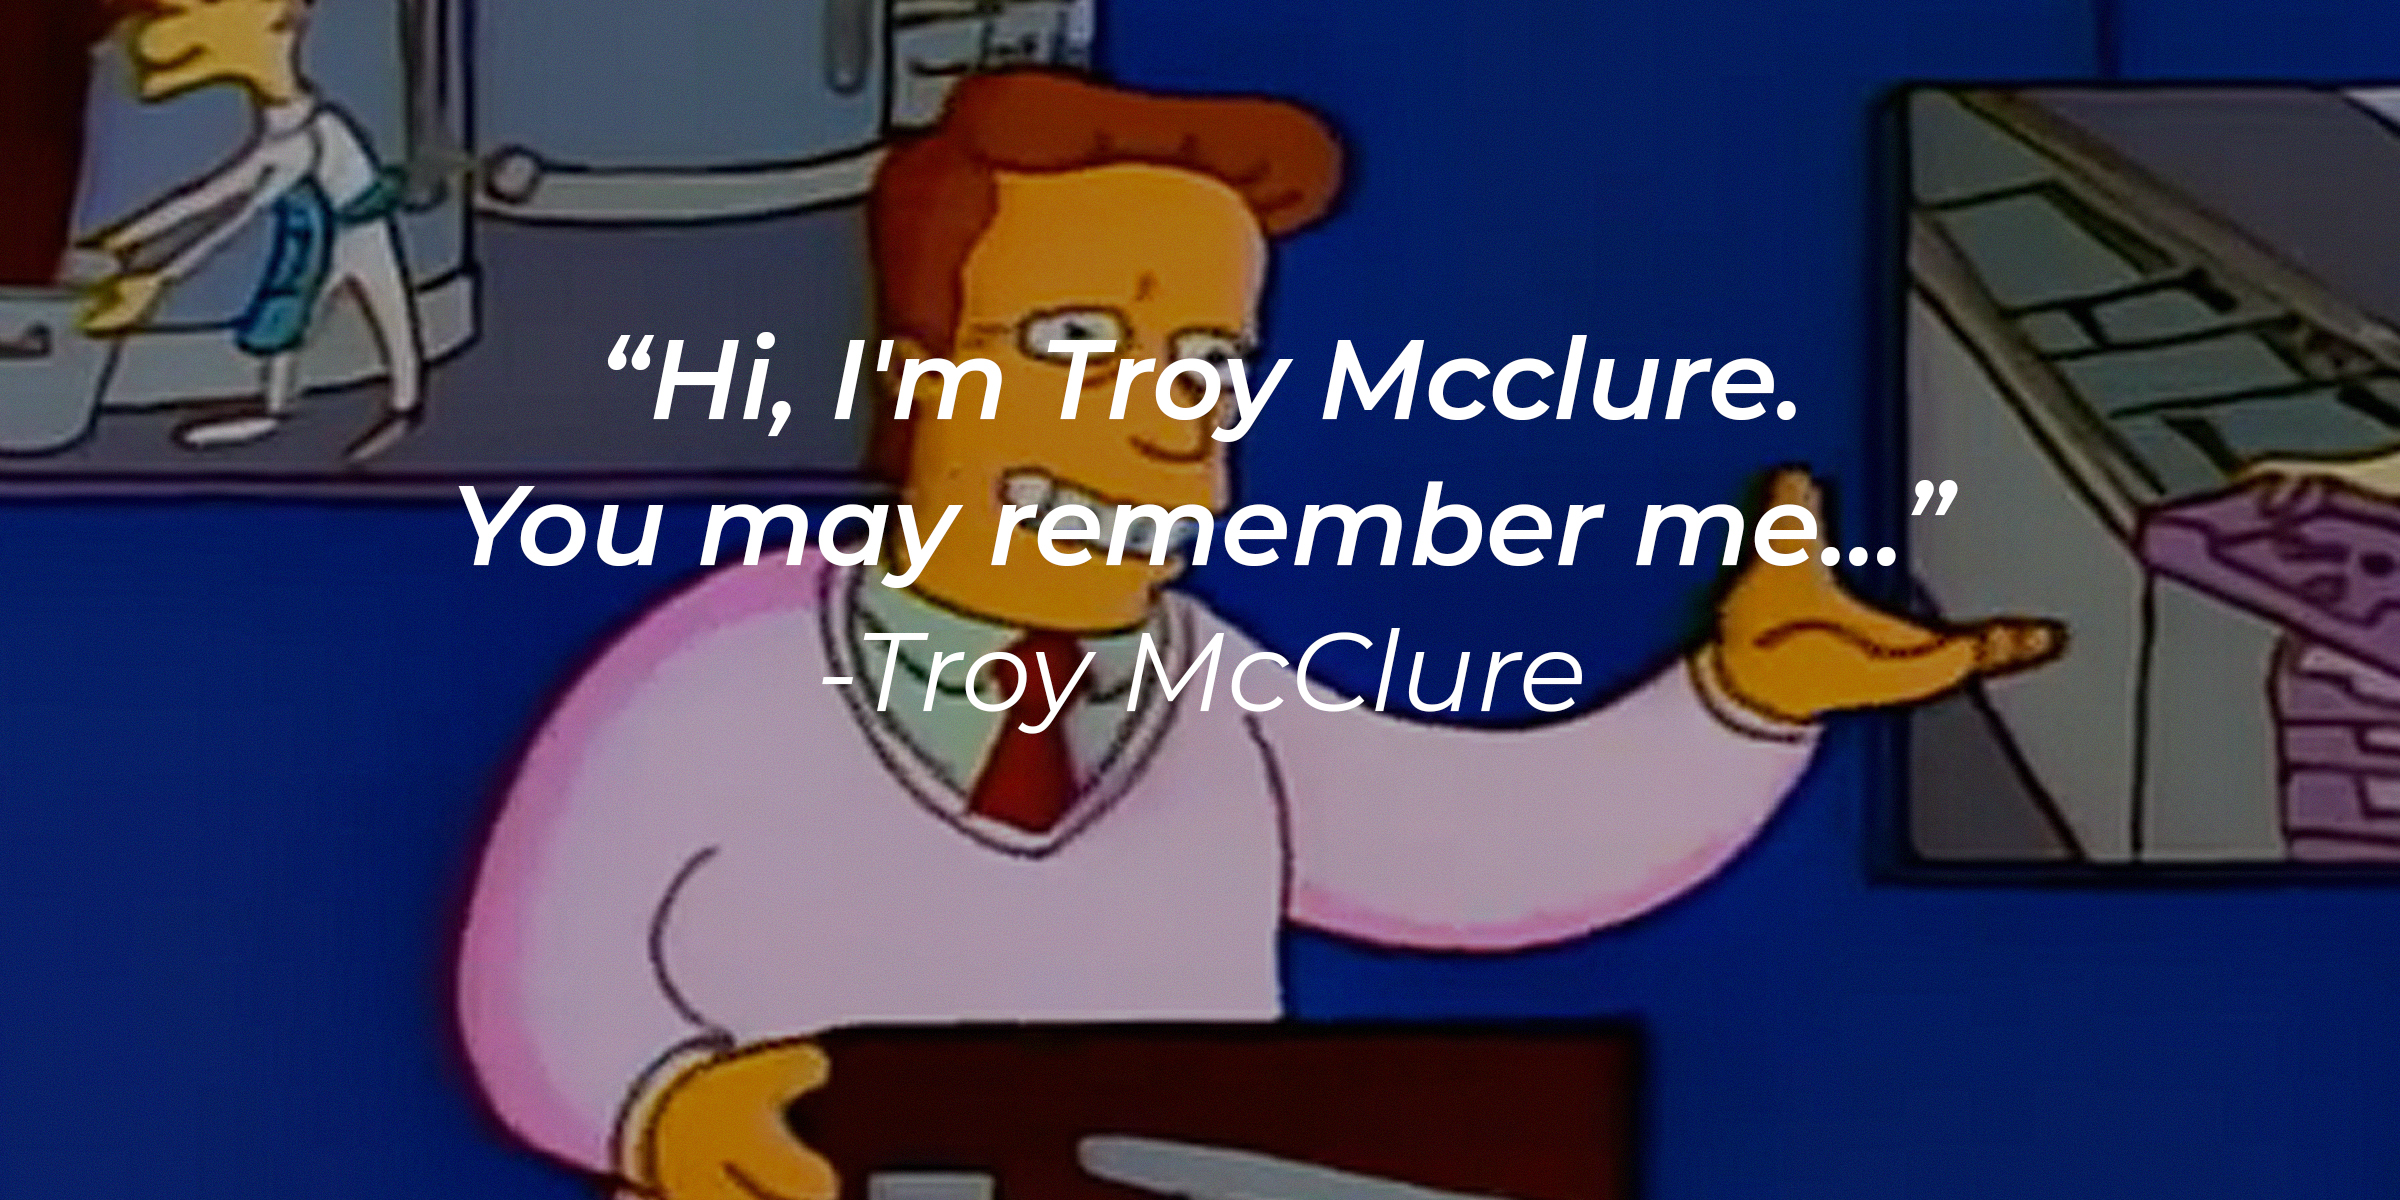 Troy McClure, with his quote: "Hi, I'm Troy McClure. You may remember me…” | Source: facebook.com/TheSimpsons